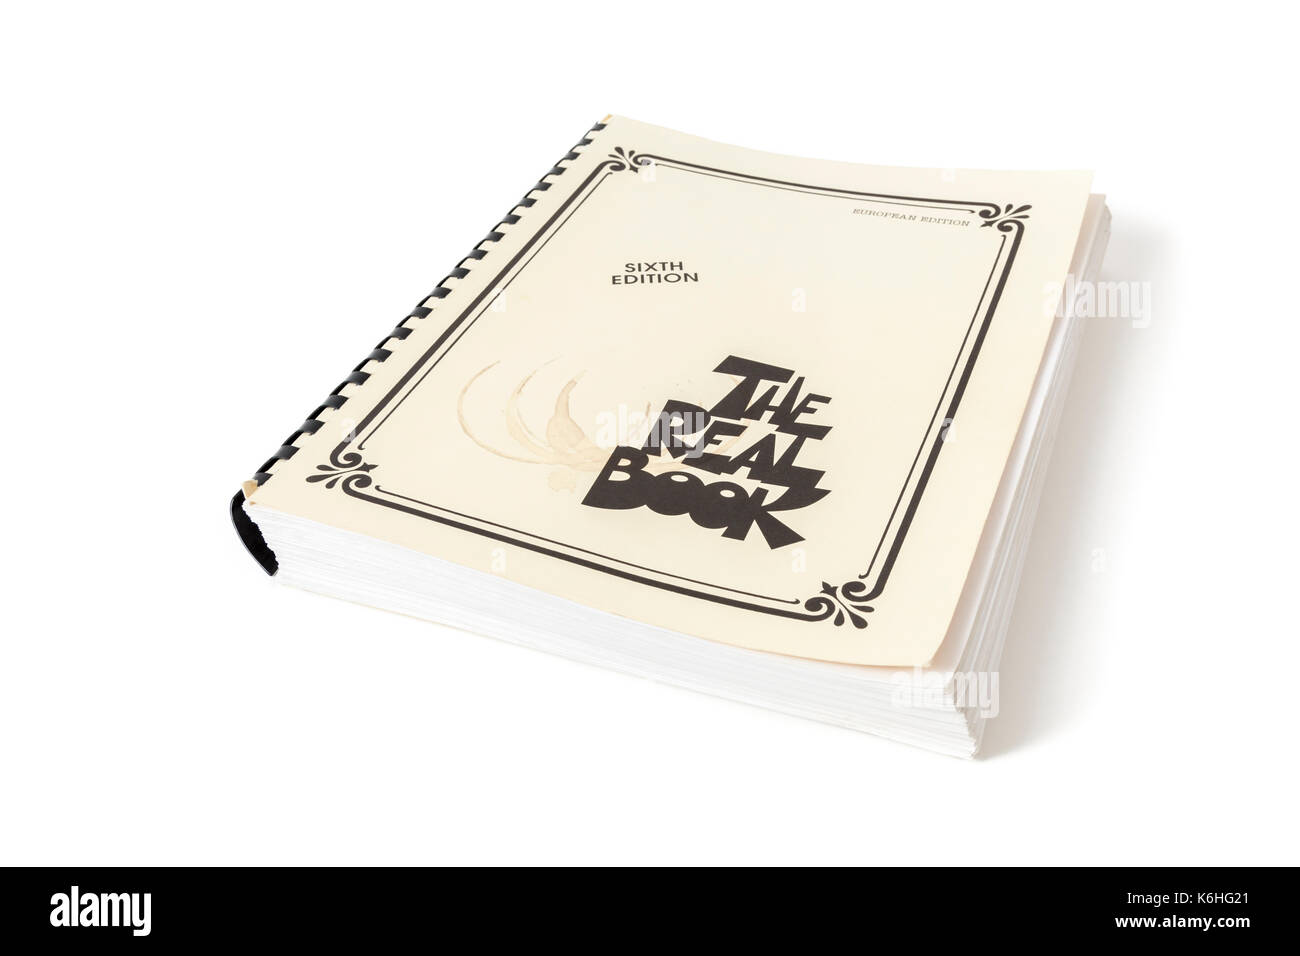 The Real Book, often referred to as a fake book. A collection of jazz sheet music. Stock Photo